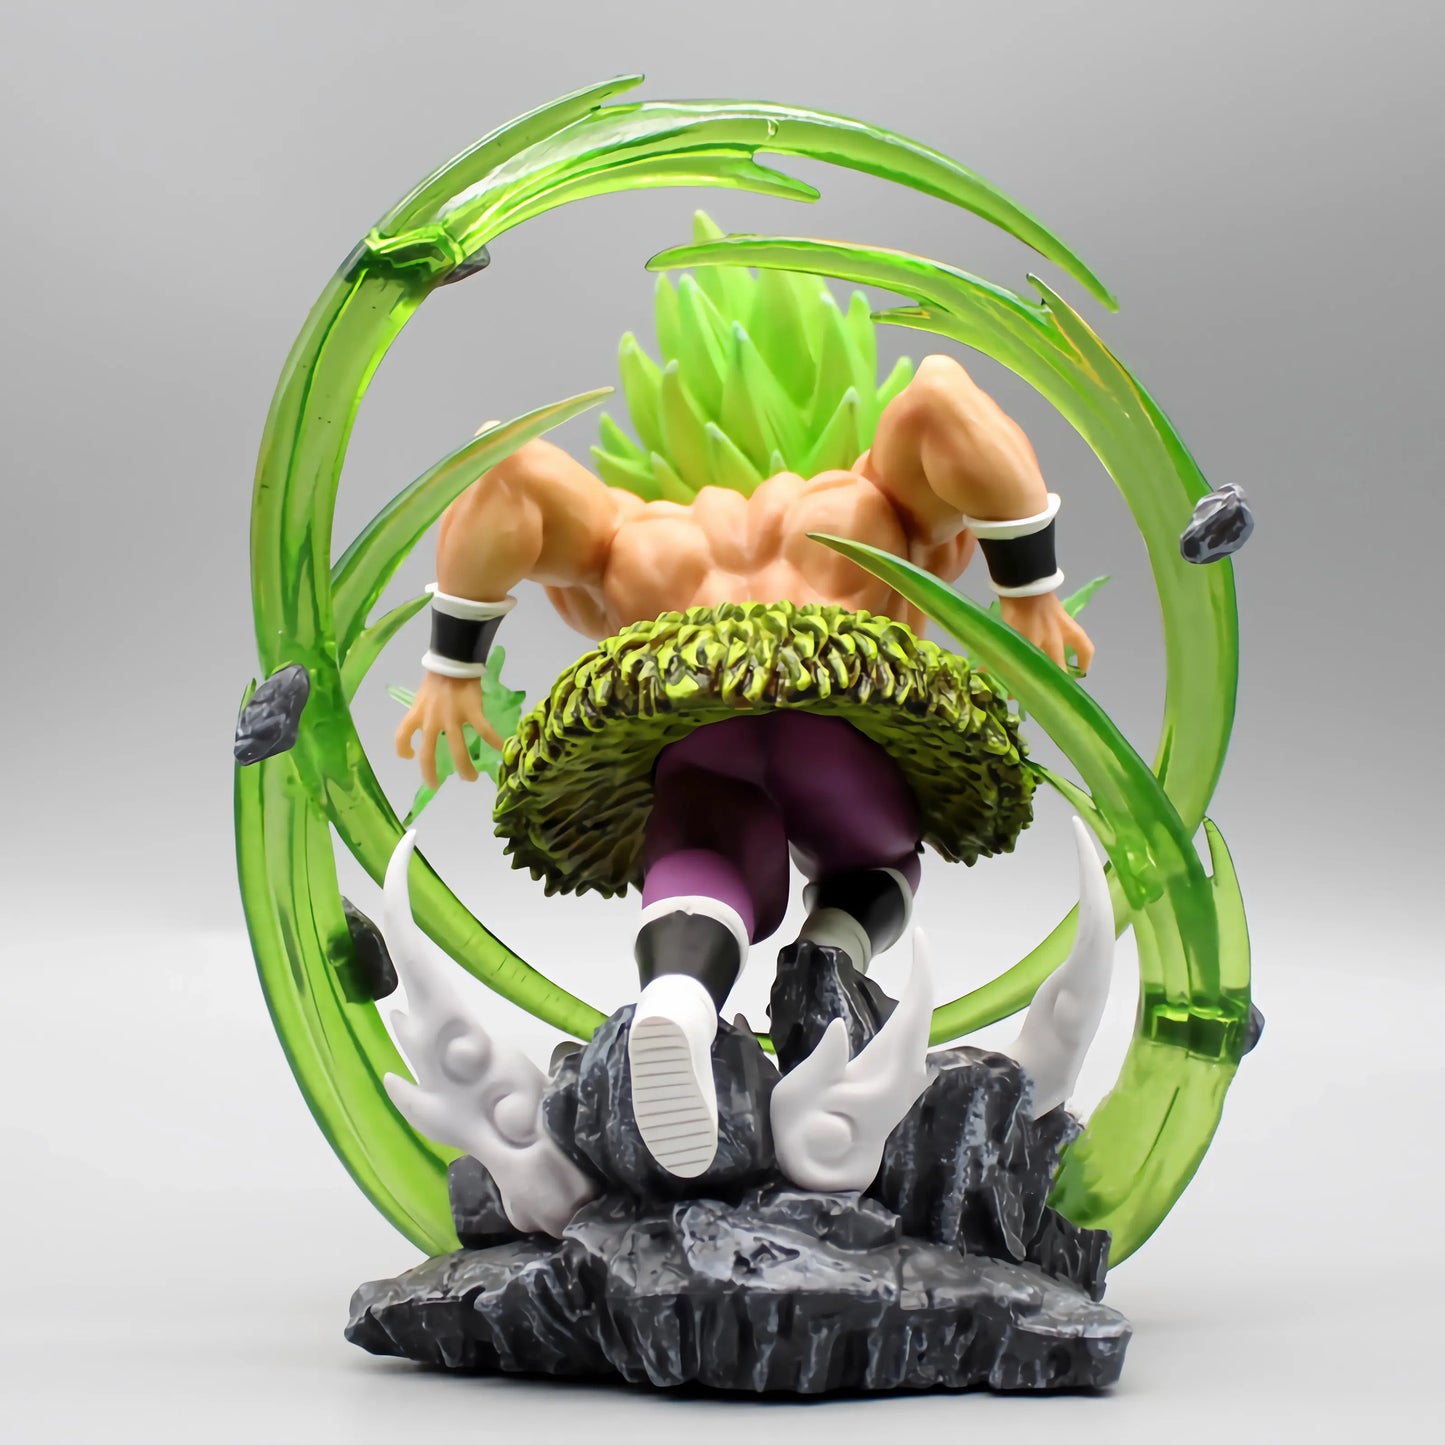 Rear angle of the Legendary Might Broly figure from Dragon Ball, showing the figure's dynamic pose and energy effects against a white background.